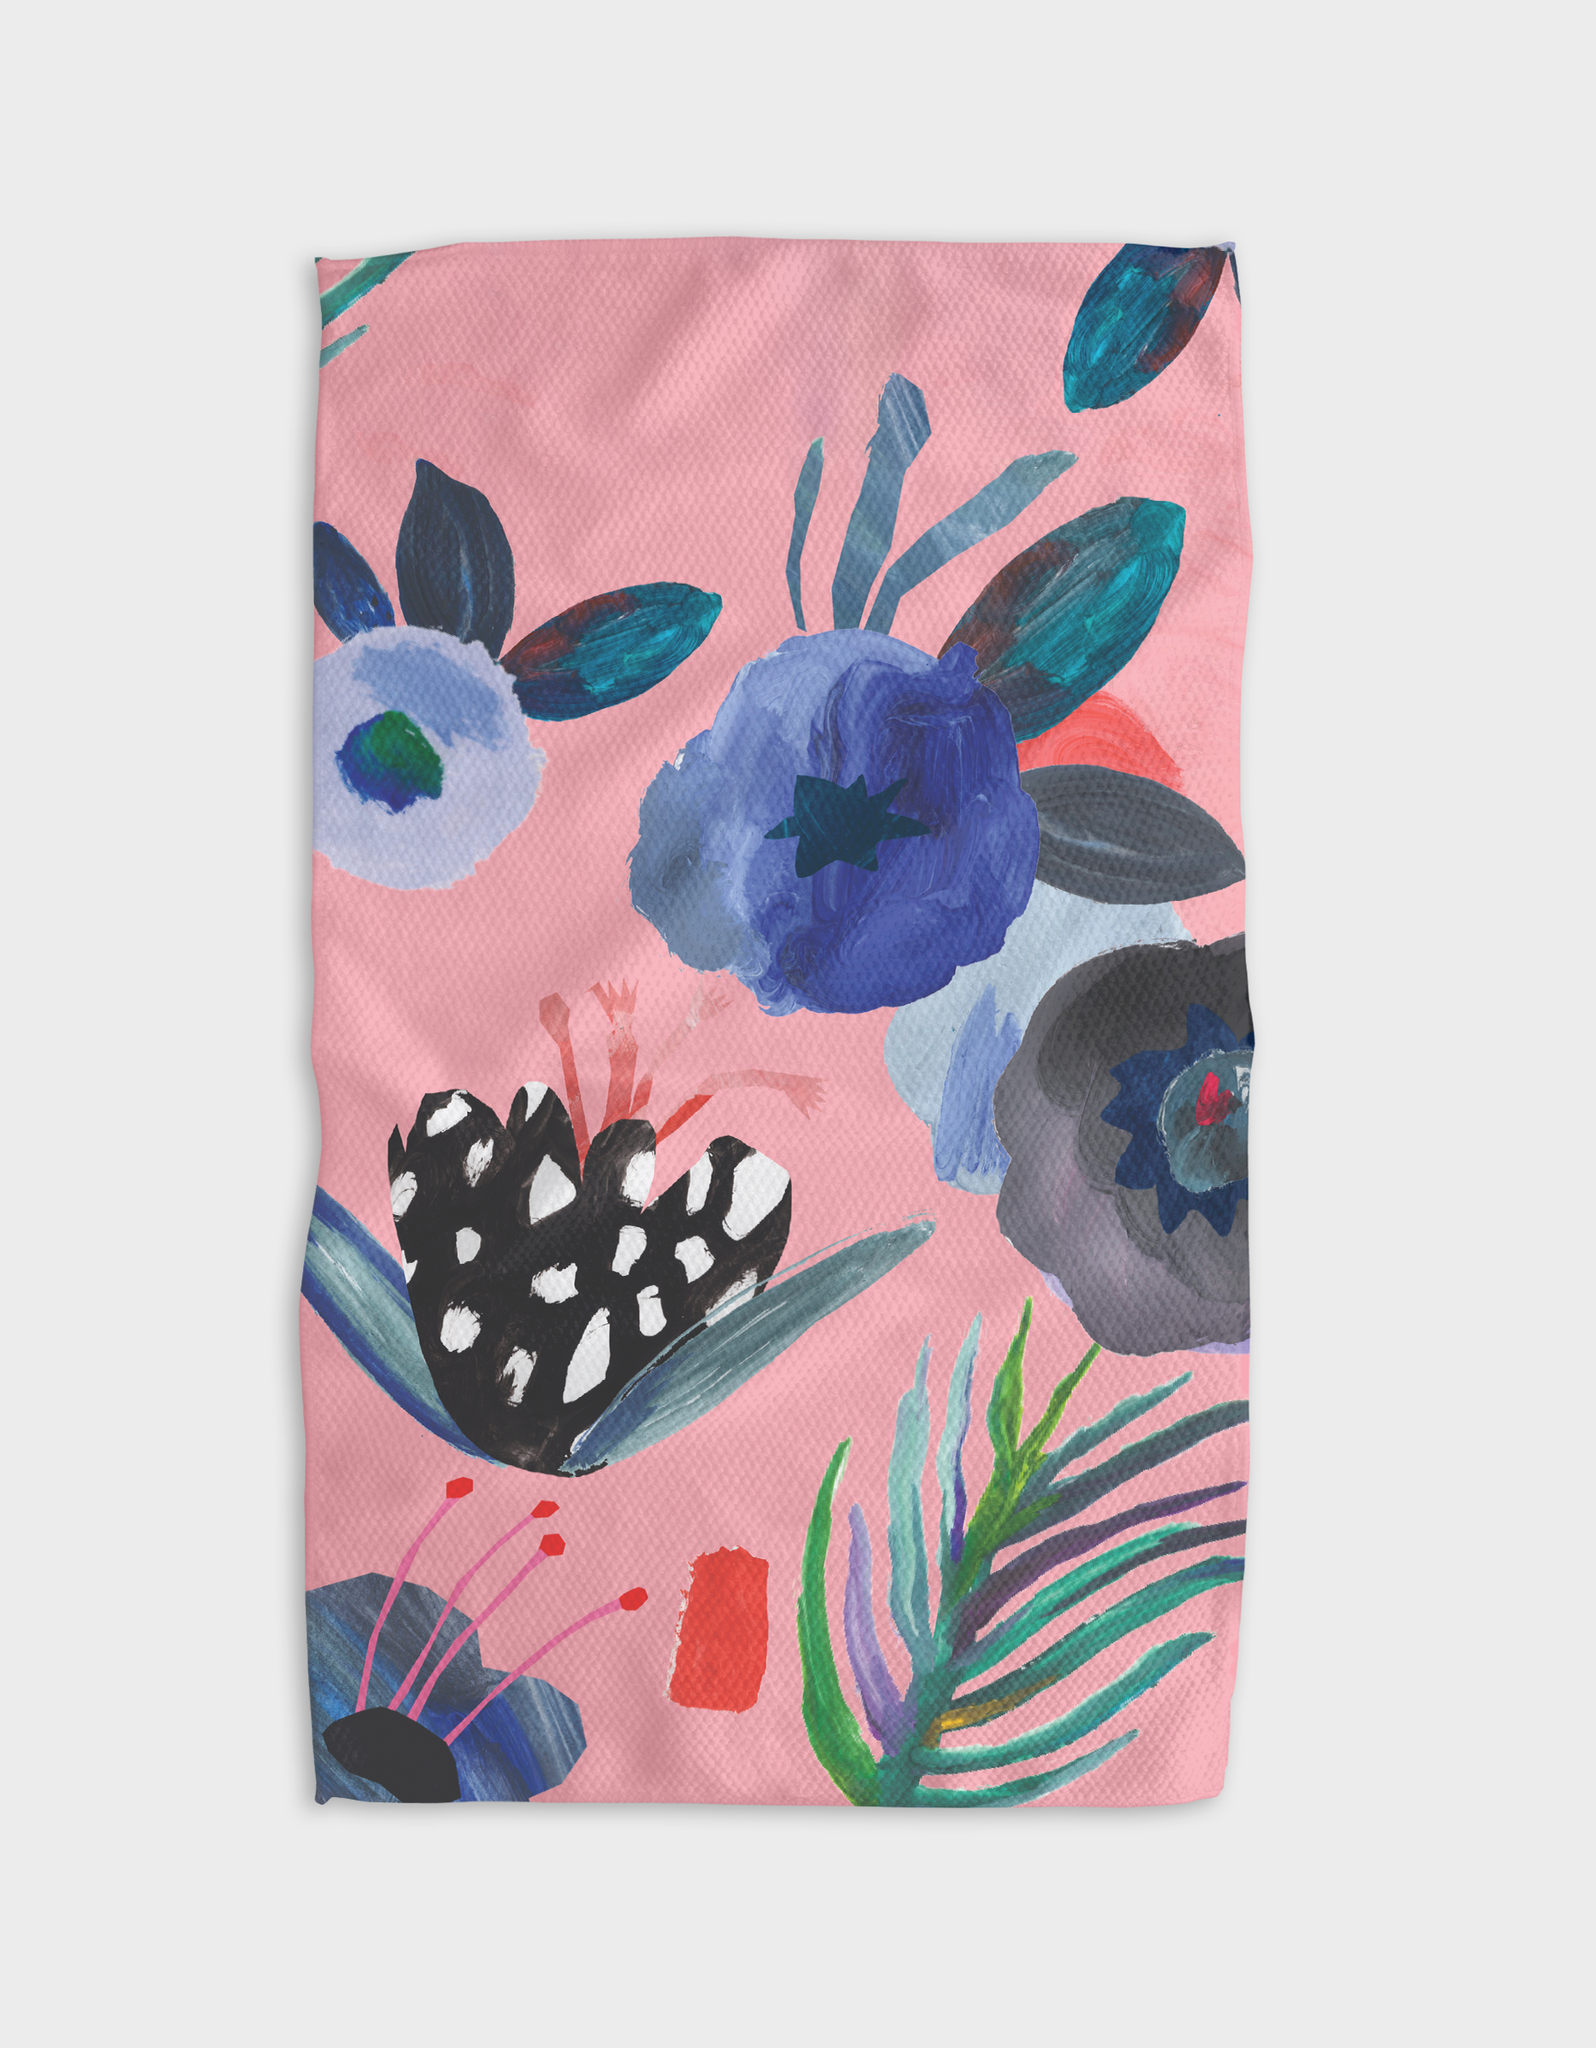 Geometry Tea Towel, Putty Pinecones – To The Nines Manitowish Waters